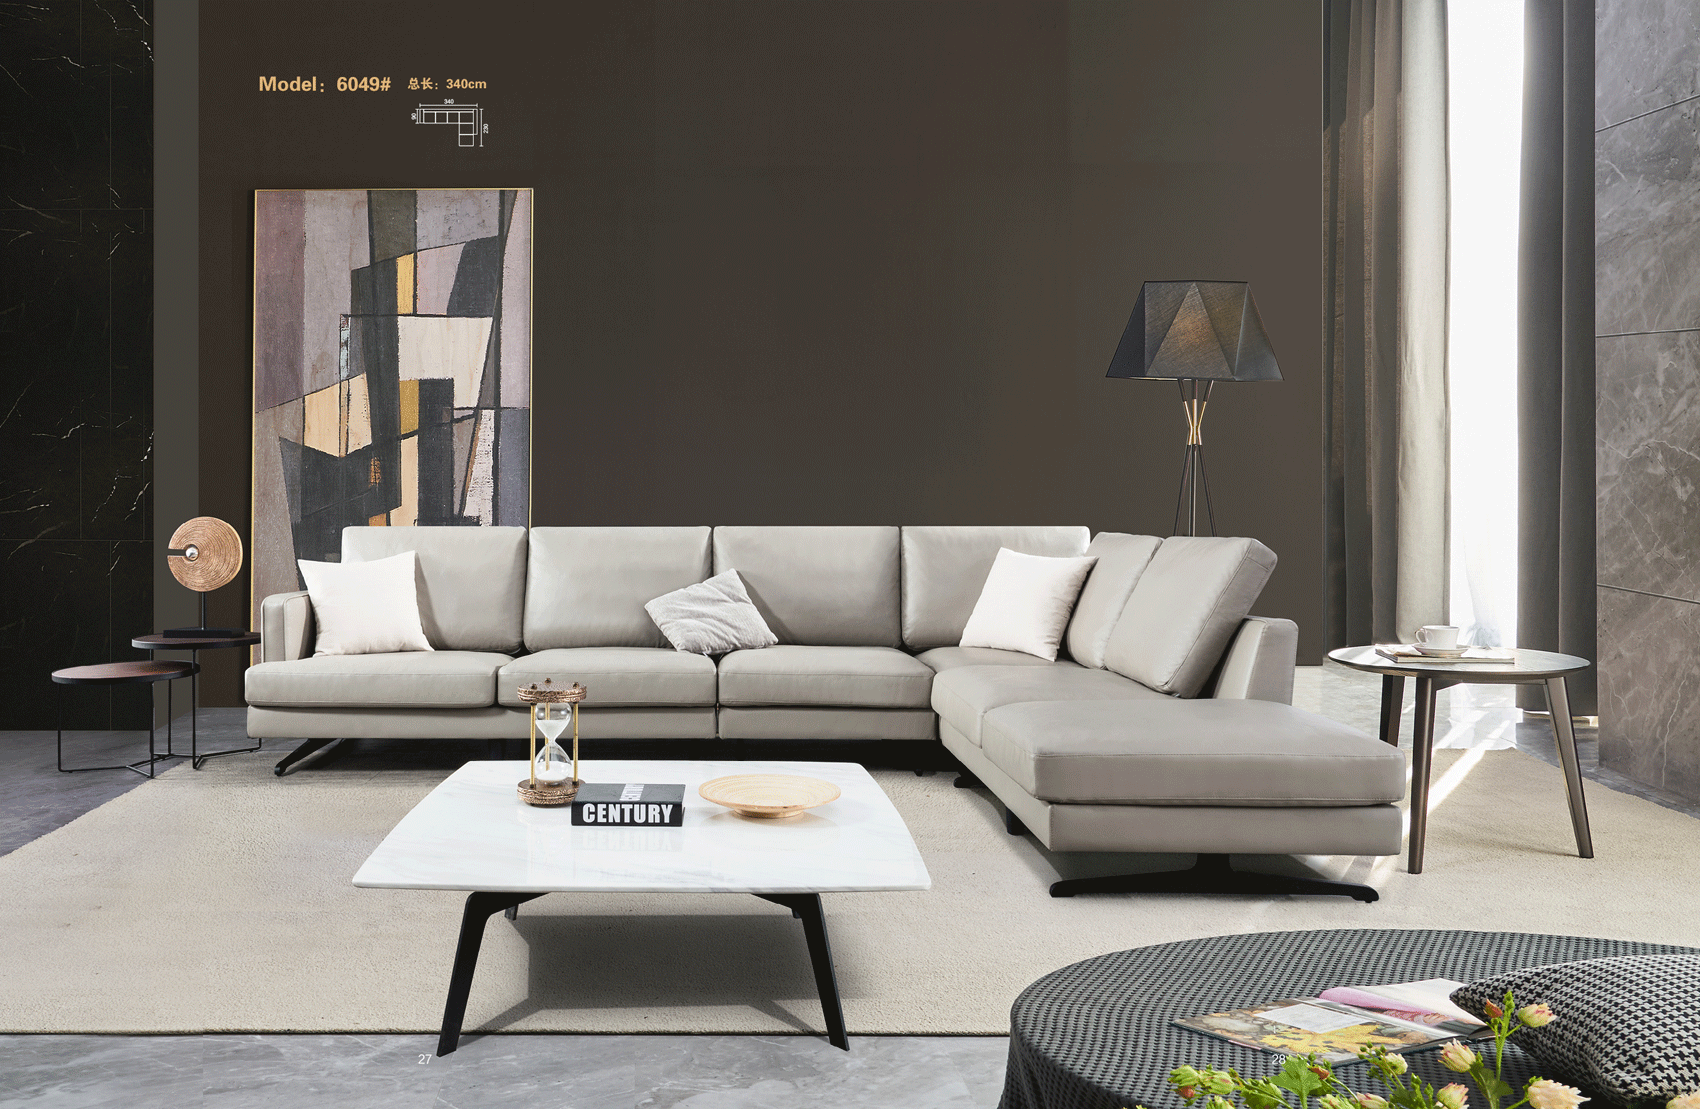 Brands Camel Gold Collection, Italy 6049 Sectional